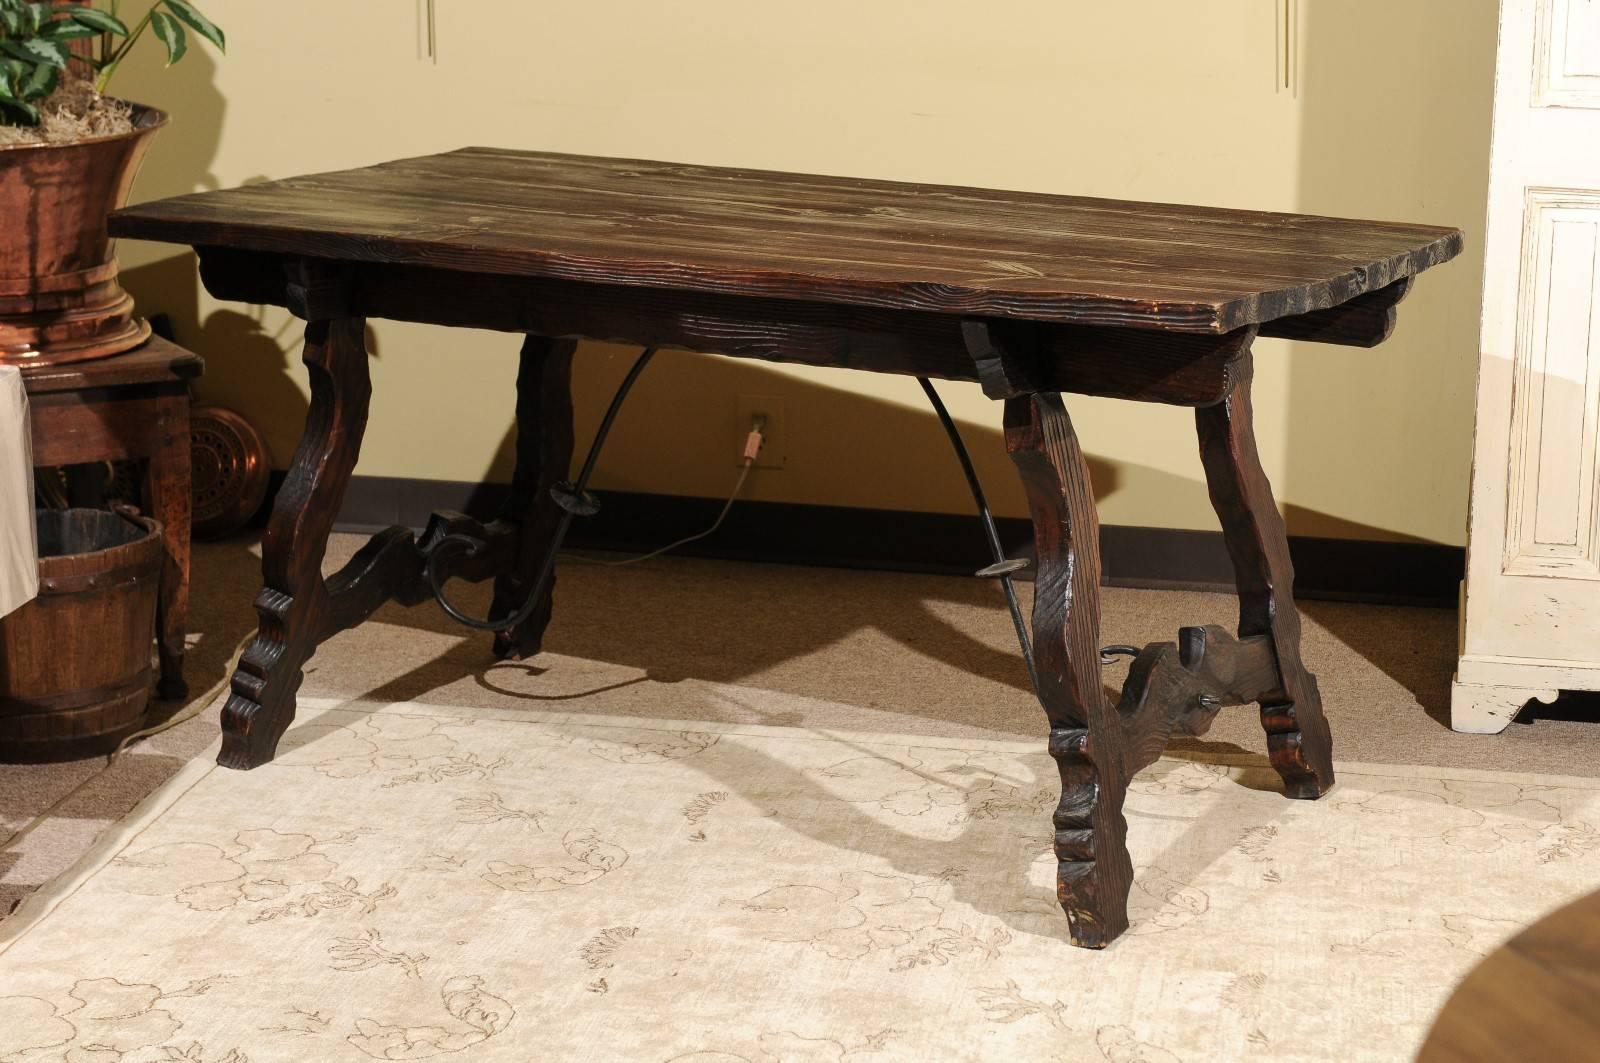 Vintage Spanish style pine table with iron stretcher, circa 1950.
I love the style of this table. It's a little unusual because the top grain is very rough adding to it's charm. The stretcher is the classic style using iron for interest between the